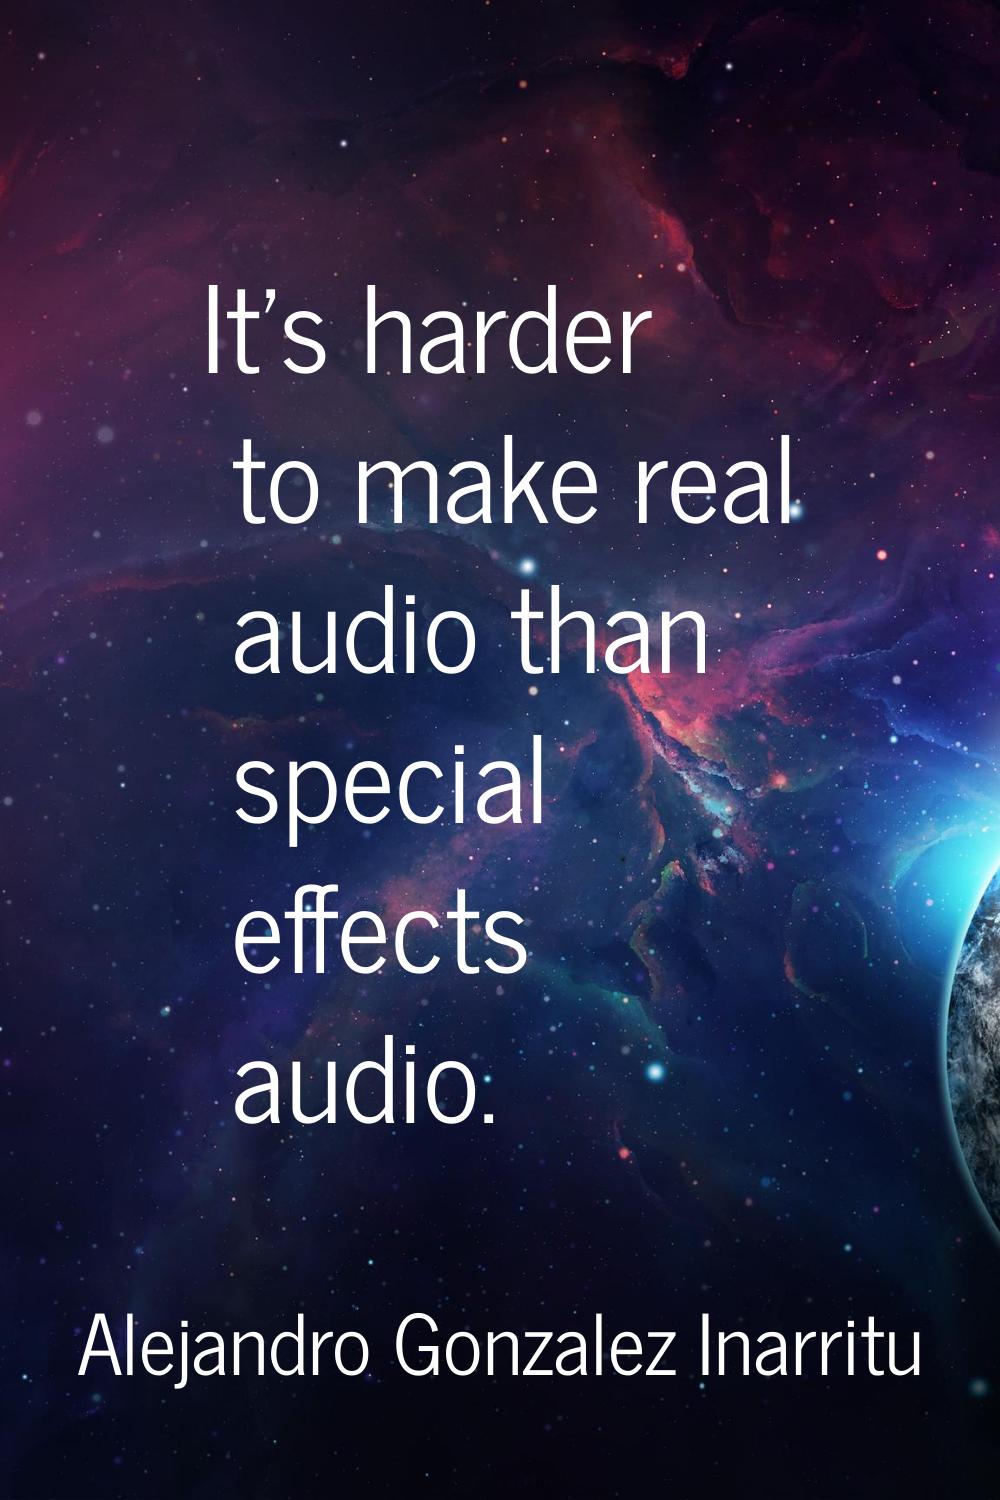 It's harder to make real audio than special effects audio.